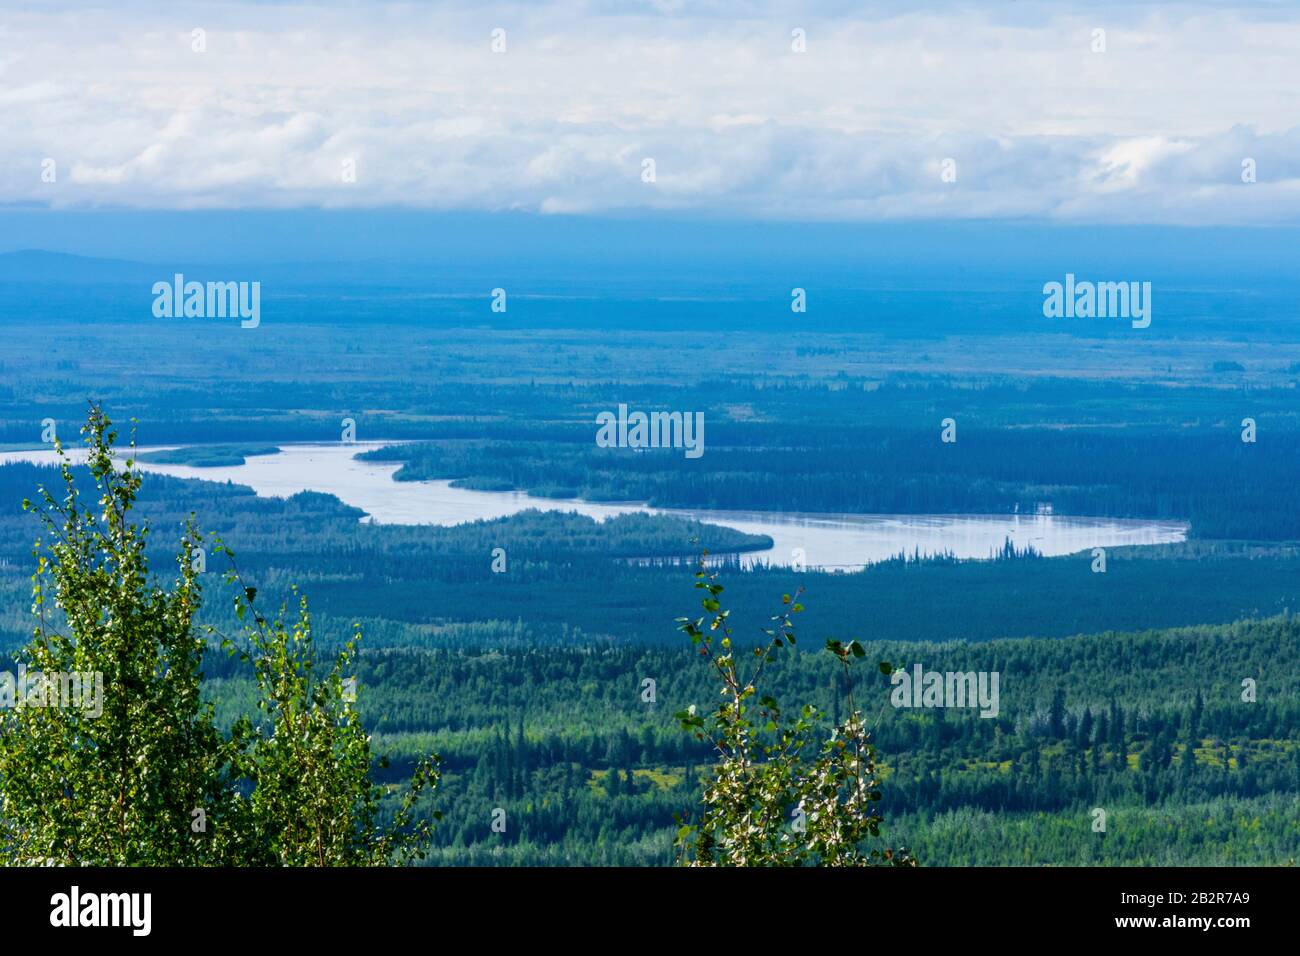 Alaska landscape photography, last frontier, scenic lakes over look, Fairbanks Alaska road trip, Unspoiled Wilderness, Pacific north west mountains Stock Photo